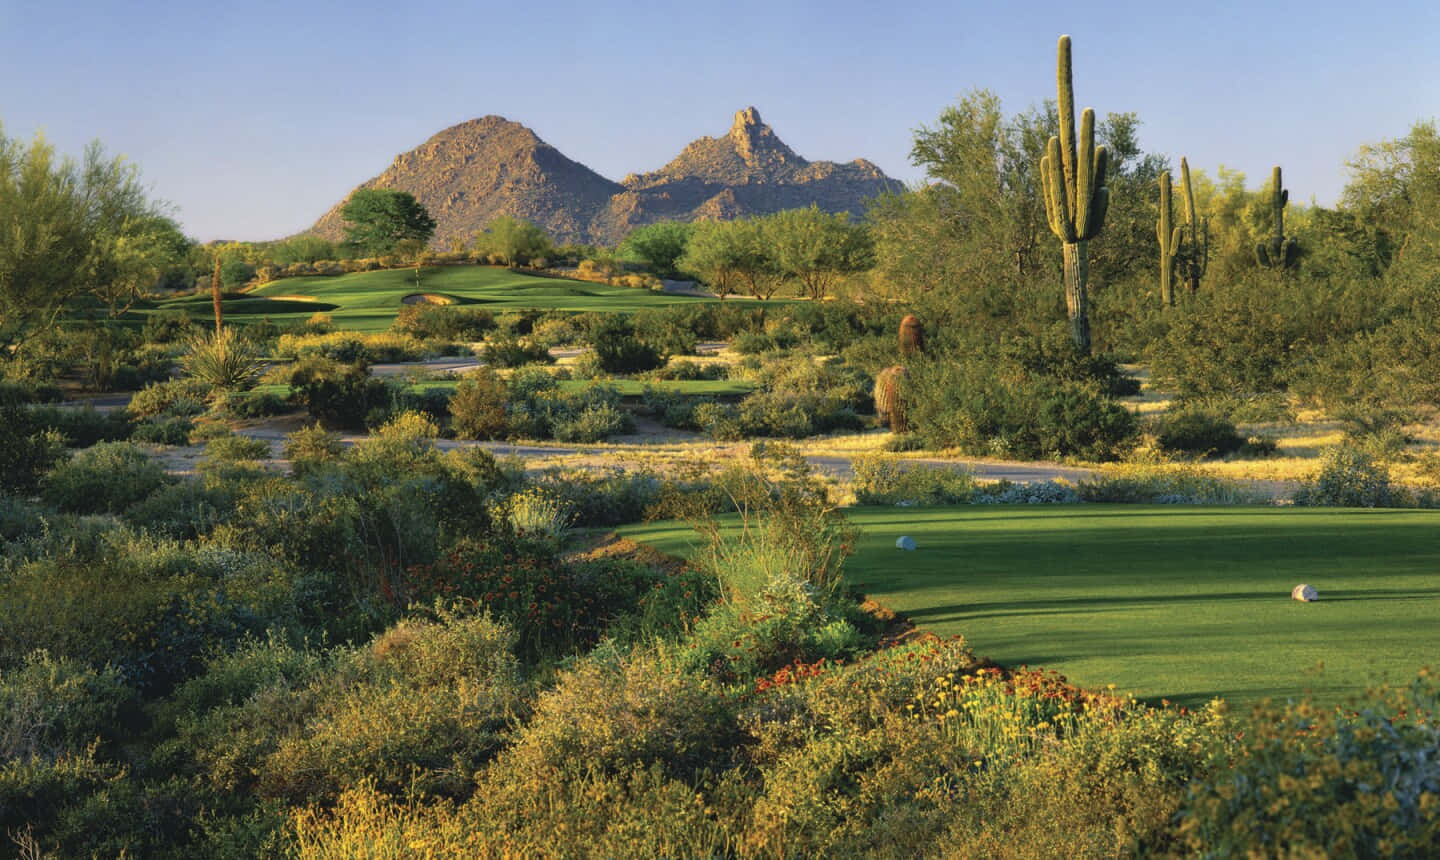 A Golf Course With Cactus And Mountains